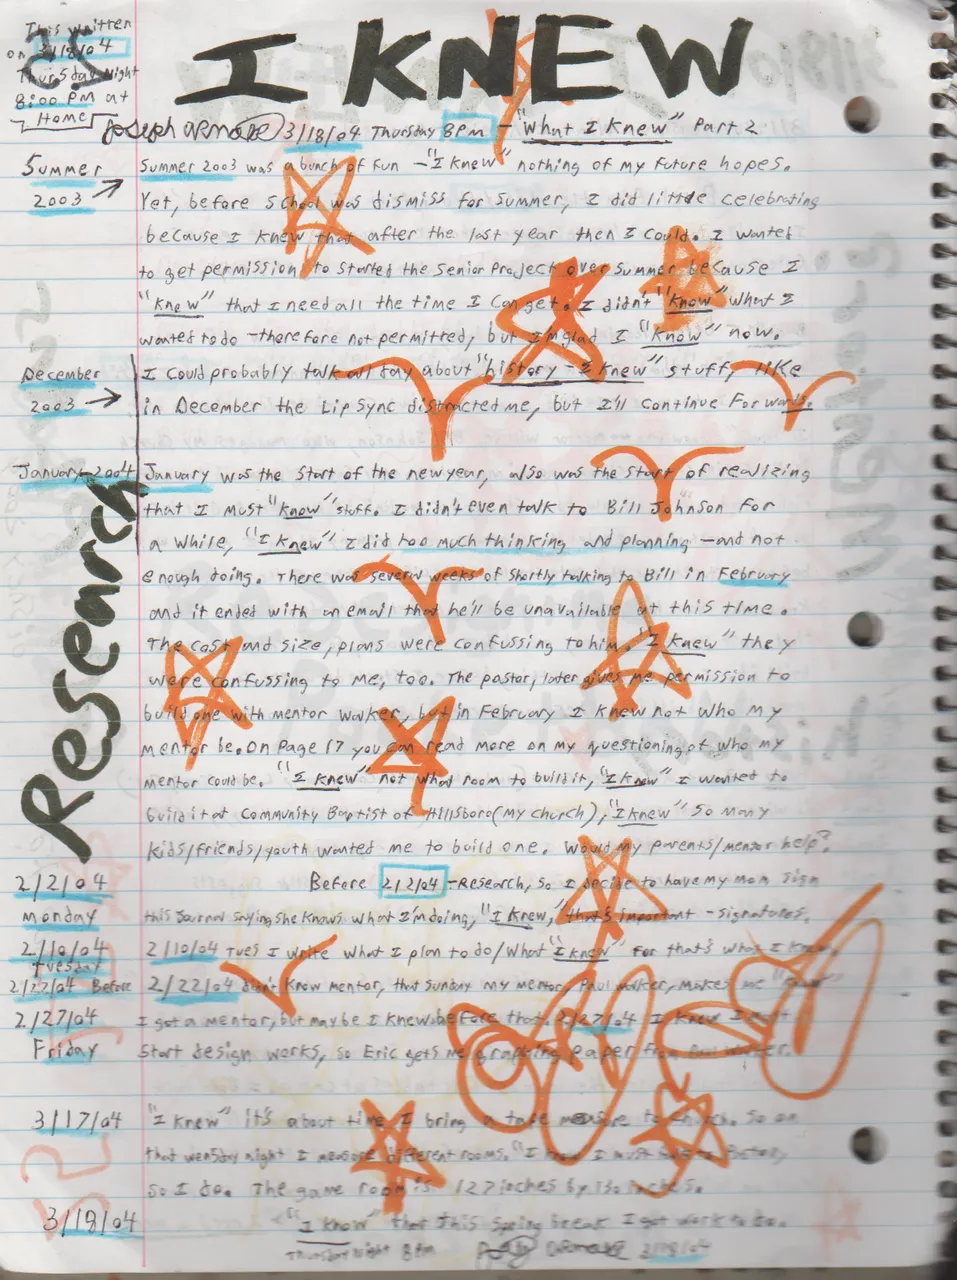 2004-01-29 - Thursday - Carpetball FGHS Senior Project Journal, Joey Arnold, Part 02, 96pages numbered, Notebook-21.png